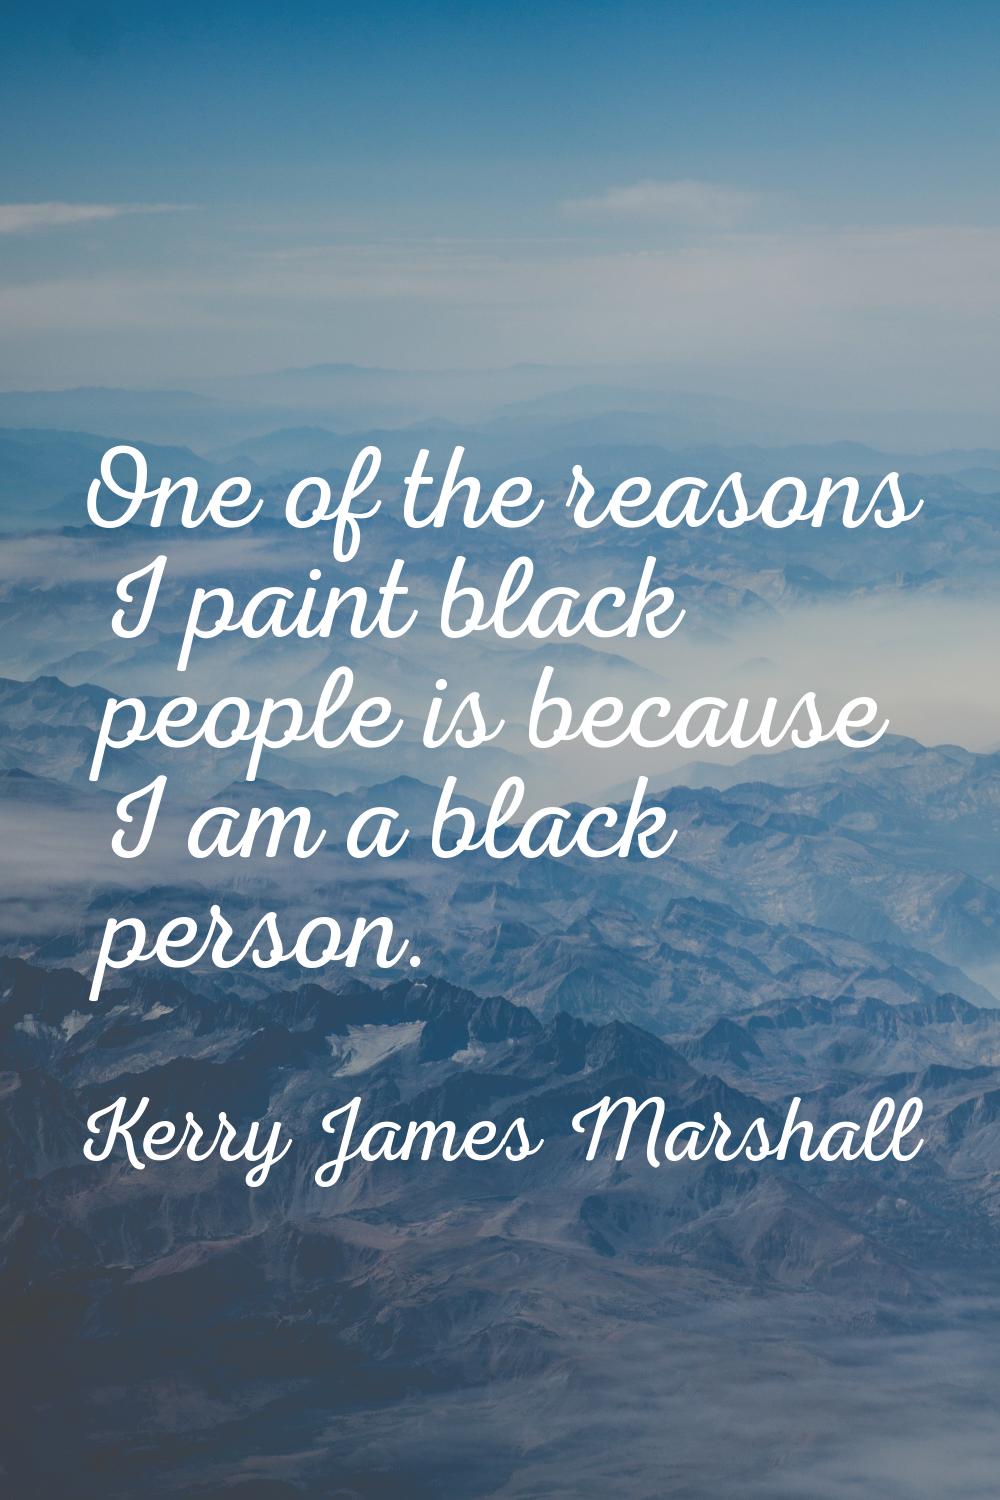 One of the reasons I paint black people is because I am a black person.